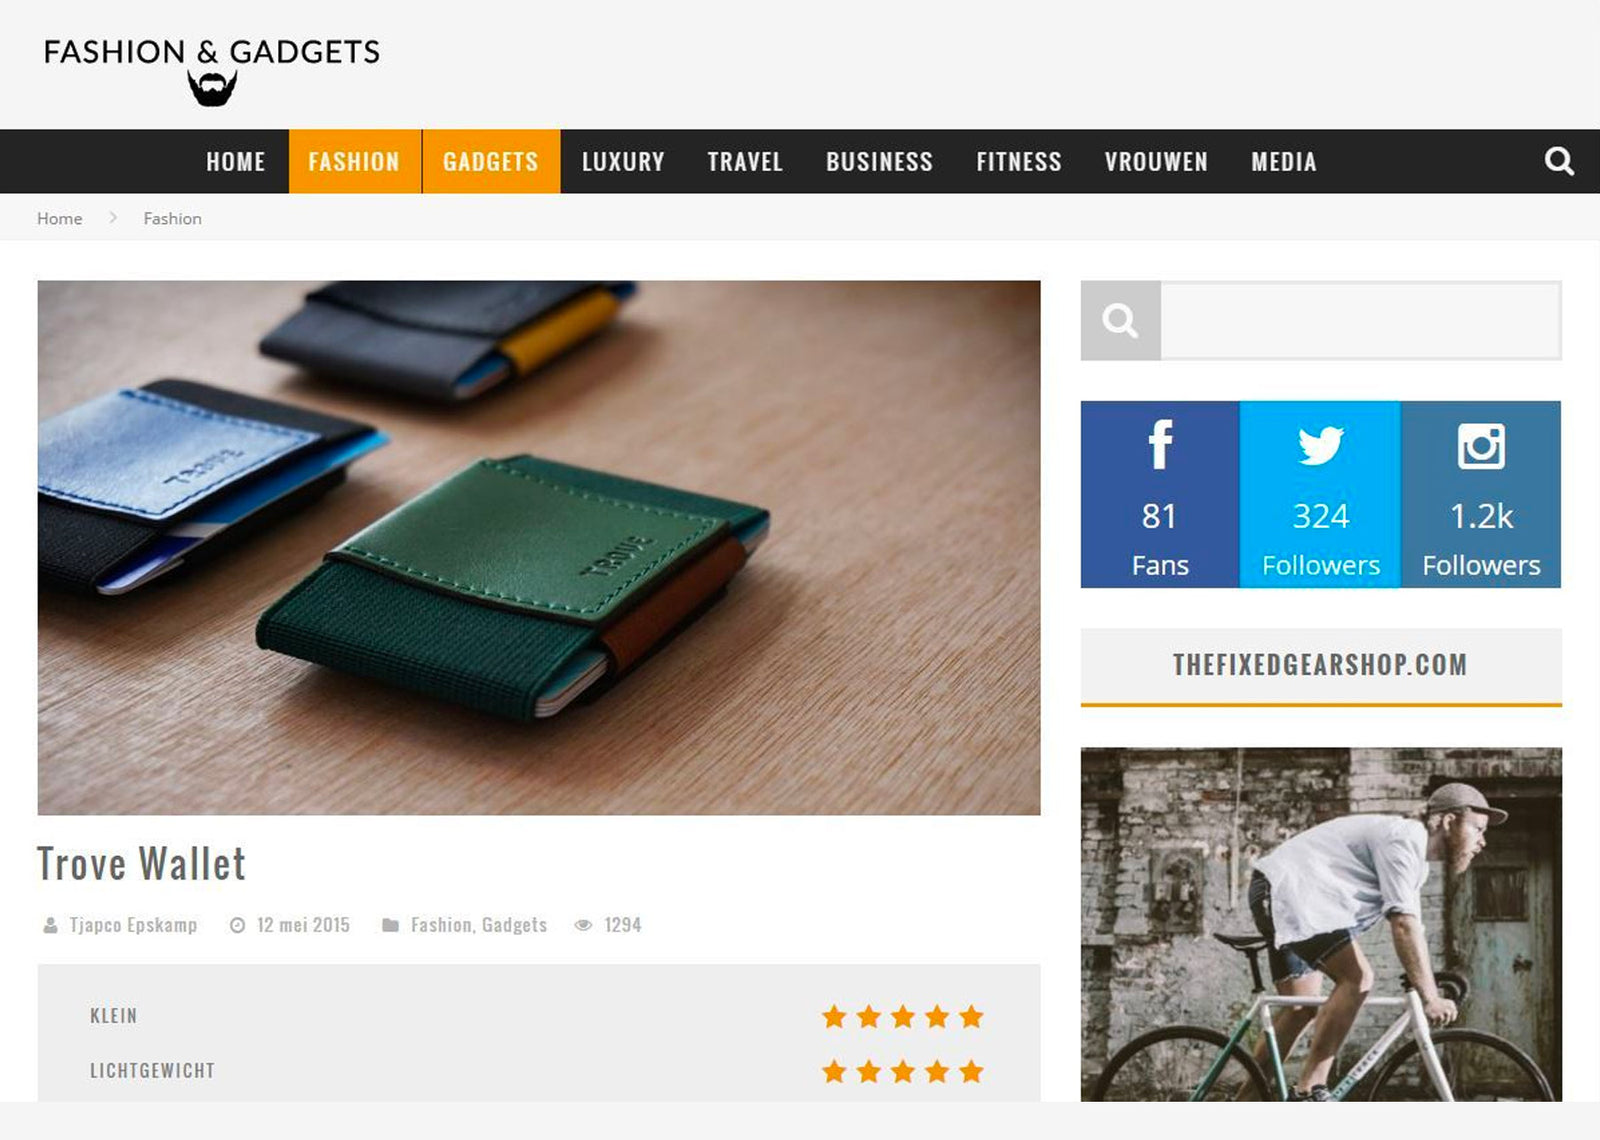 Review on Fashion & Gadgets